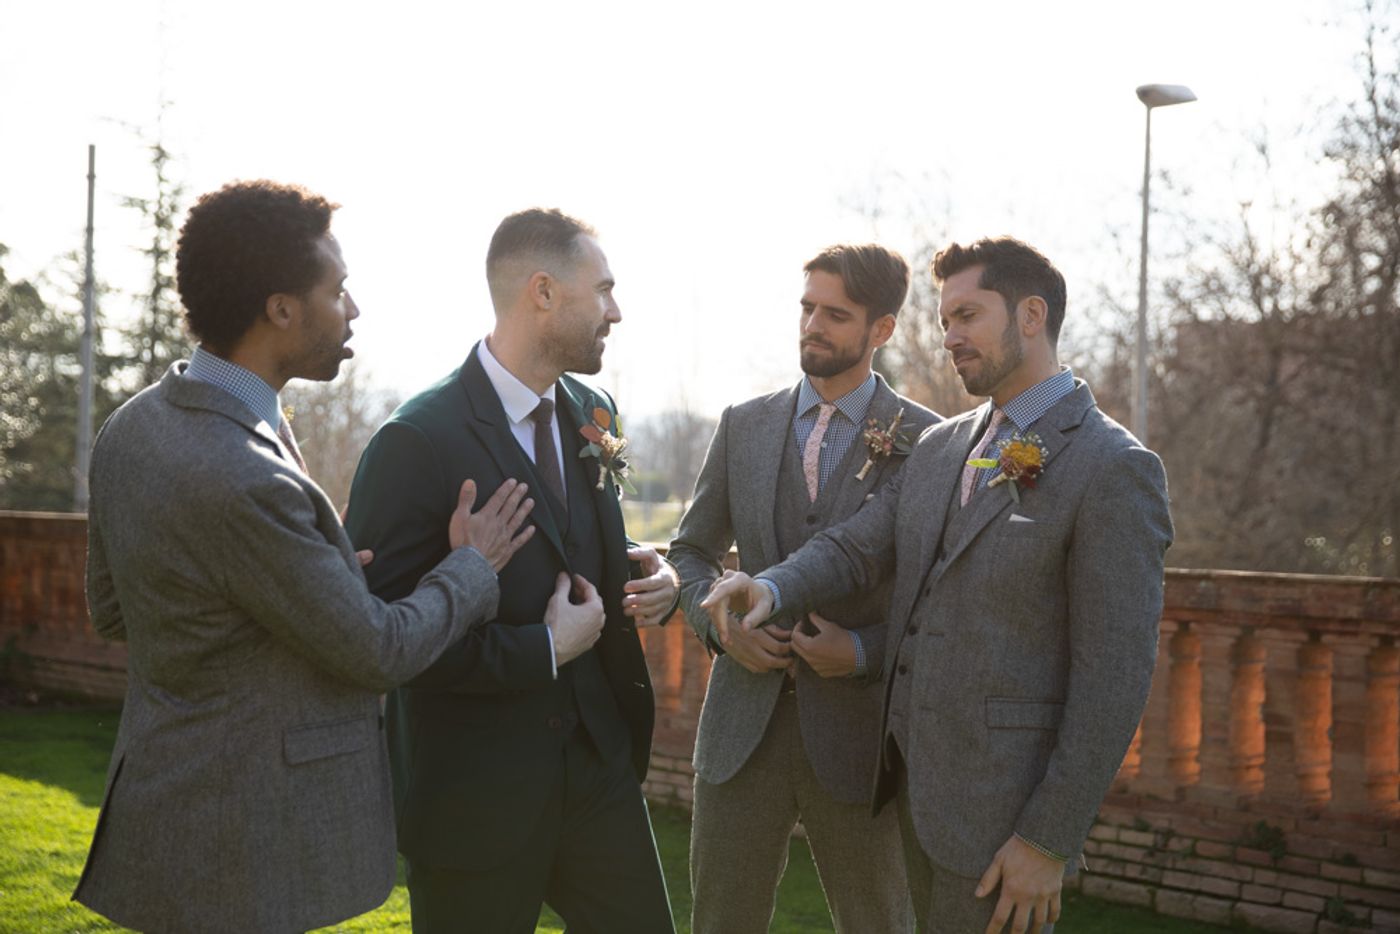 The Complete Guide to Selecting Groomsmen Suits